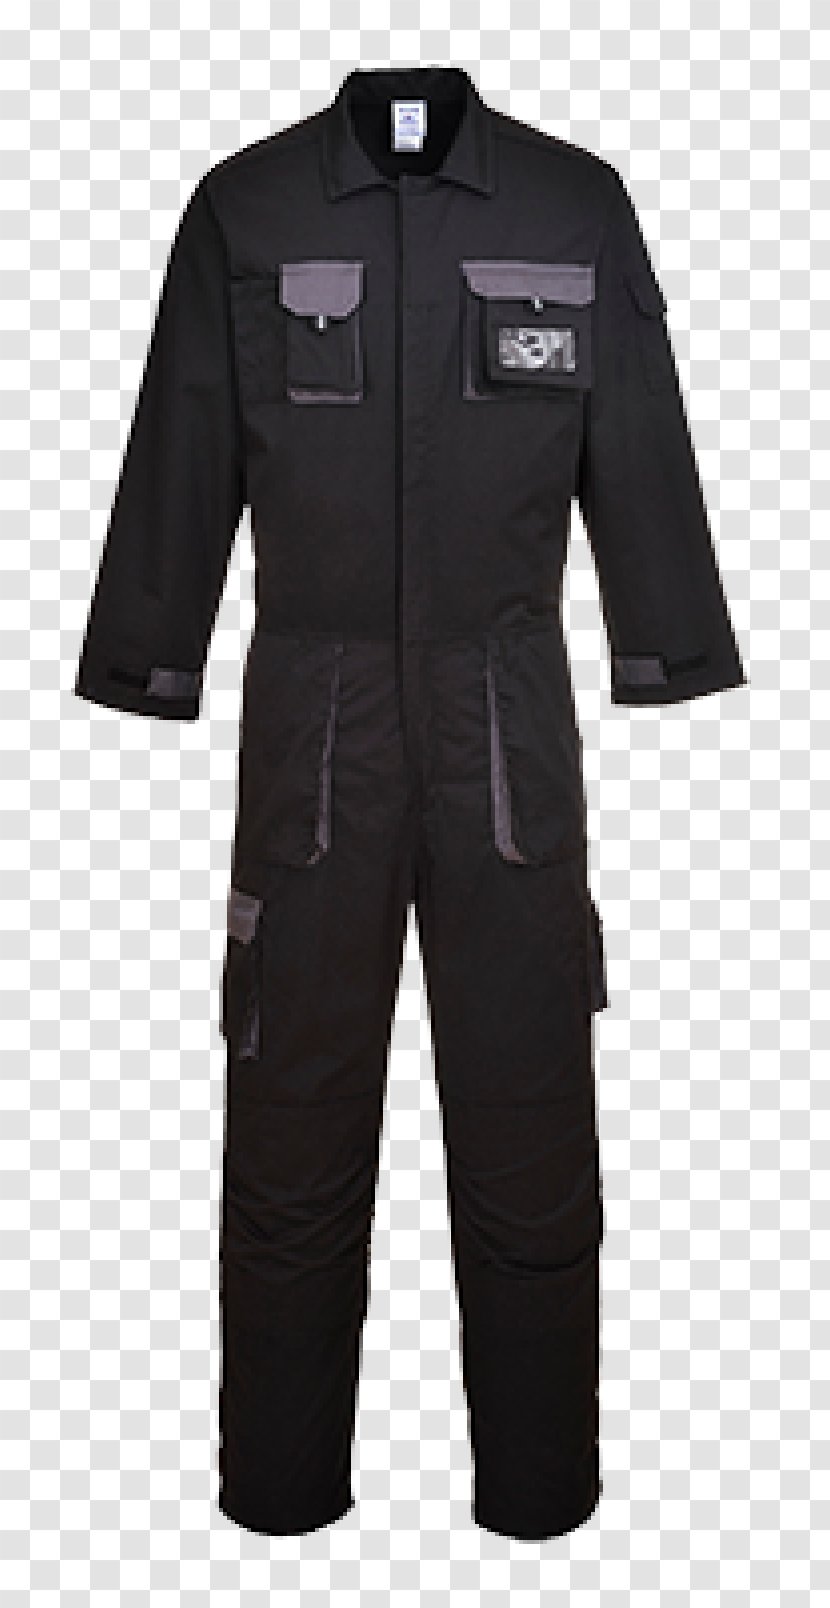 Workwear Boilersuit Overall Clothing Portwest - Suit Transparent PNG